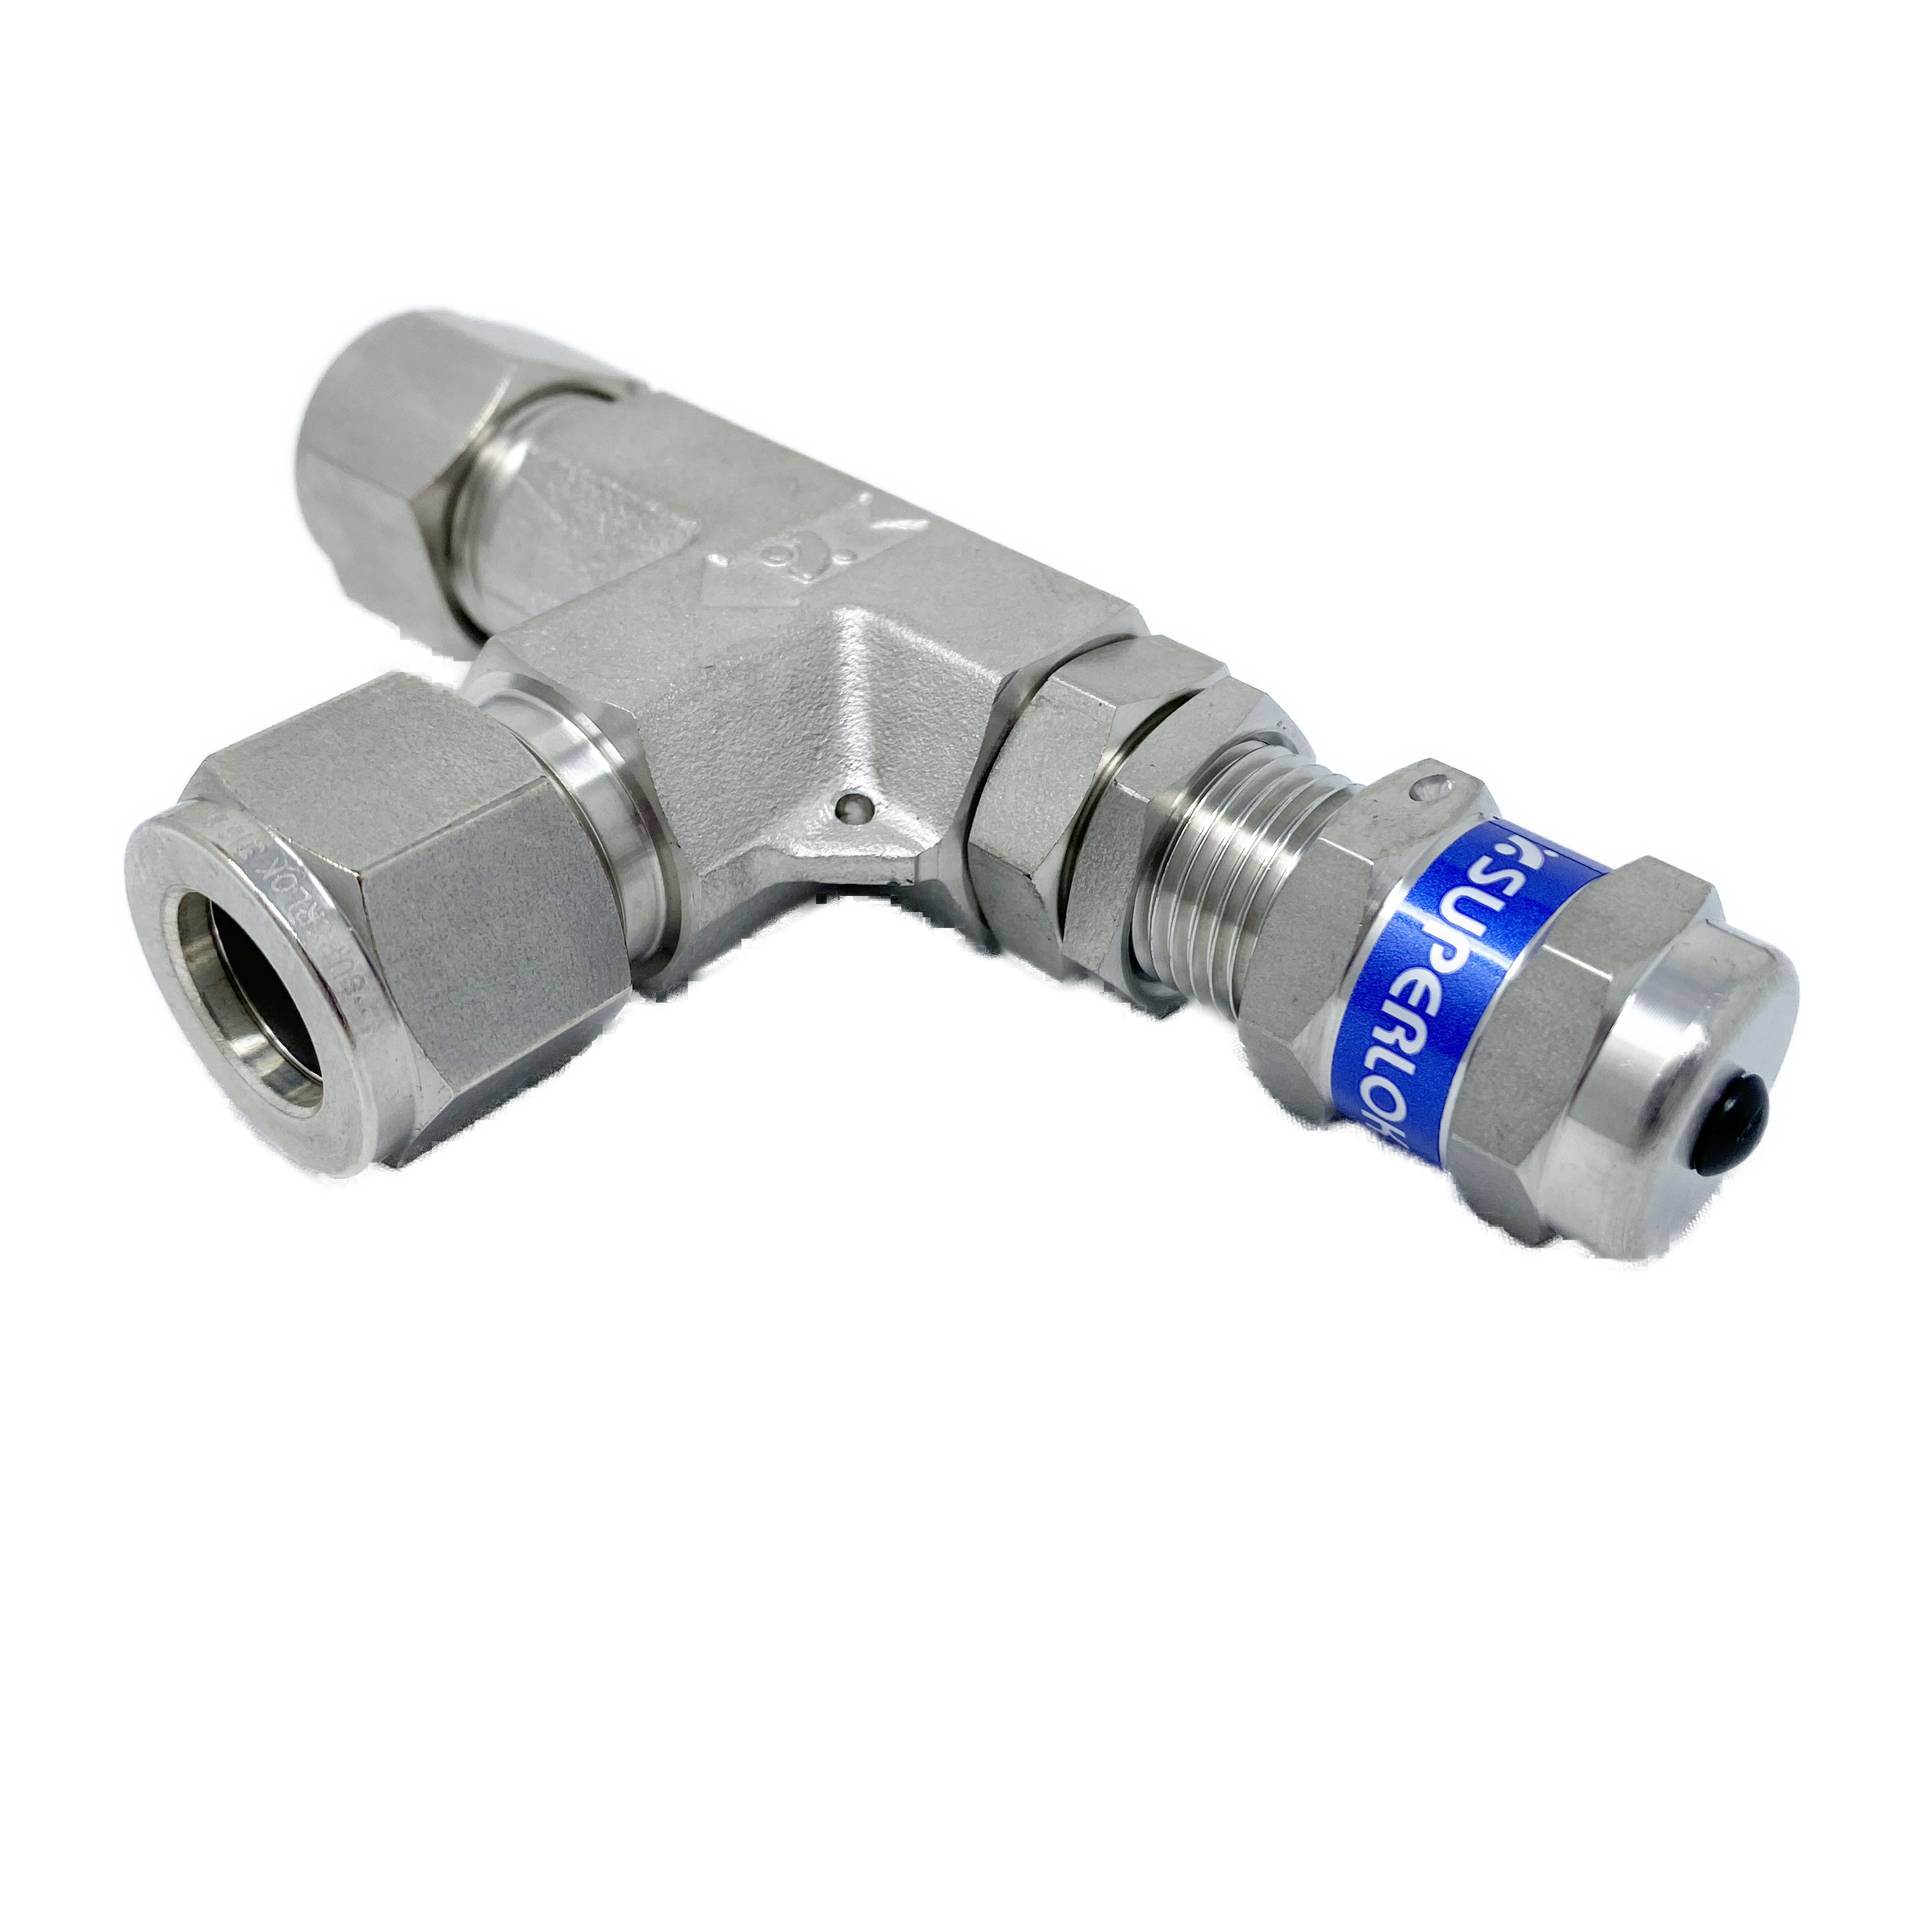 SRVL-S-4 : Superlok Inline Relief Valve, 1/4" O.D. Tube, Angle Pattern, Low Pressure, 300psi, 316SS, No Spring